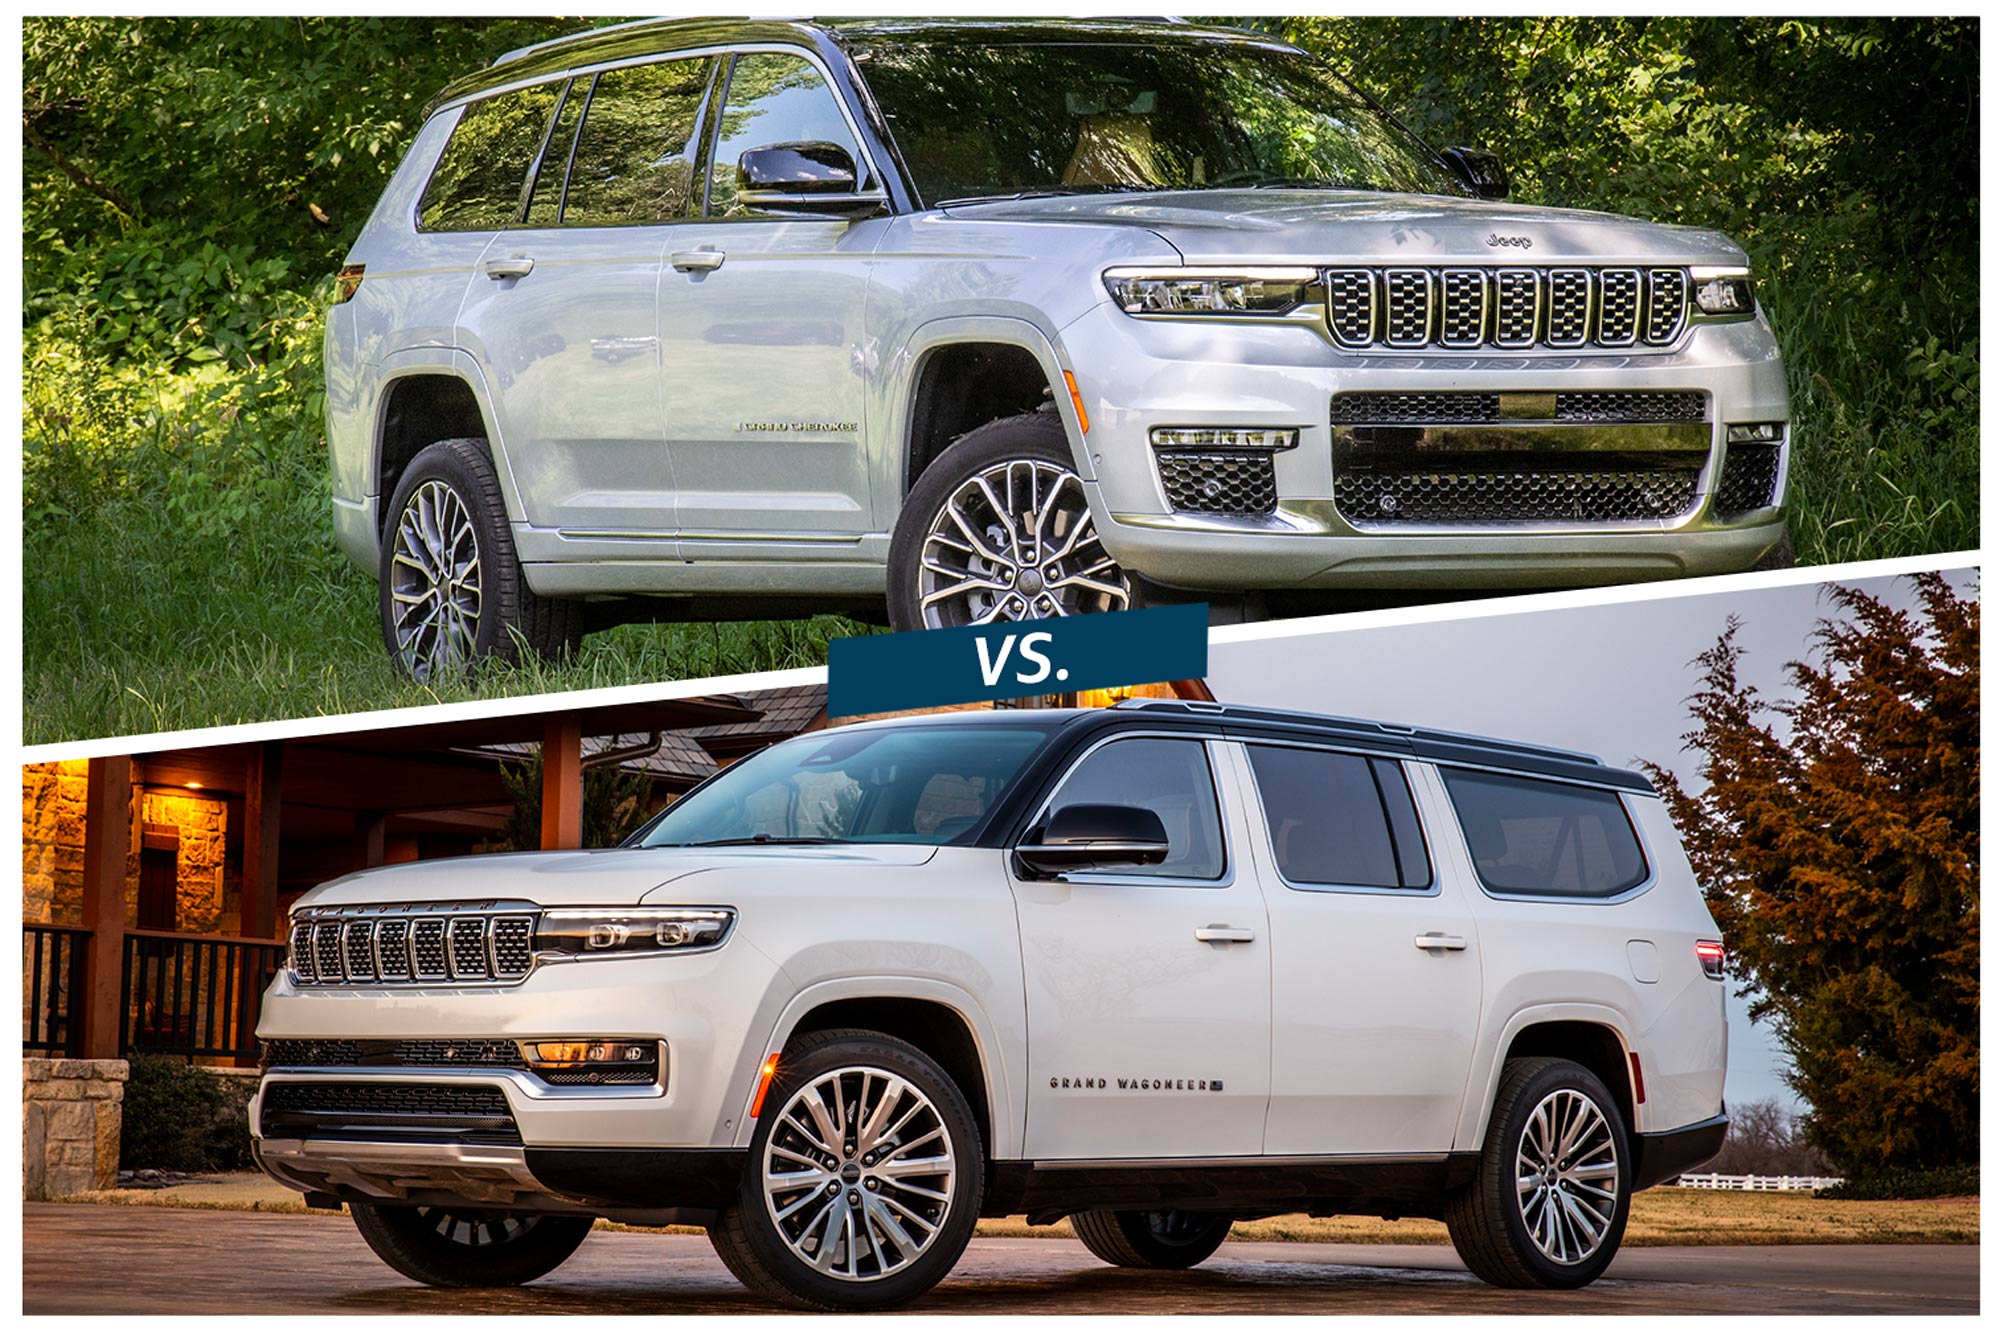 2023 Jeep Grand Cherokee L in silver and 2023 Jeep Grand Wagoneer L in white compared